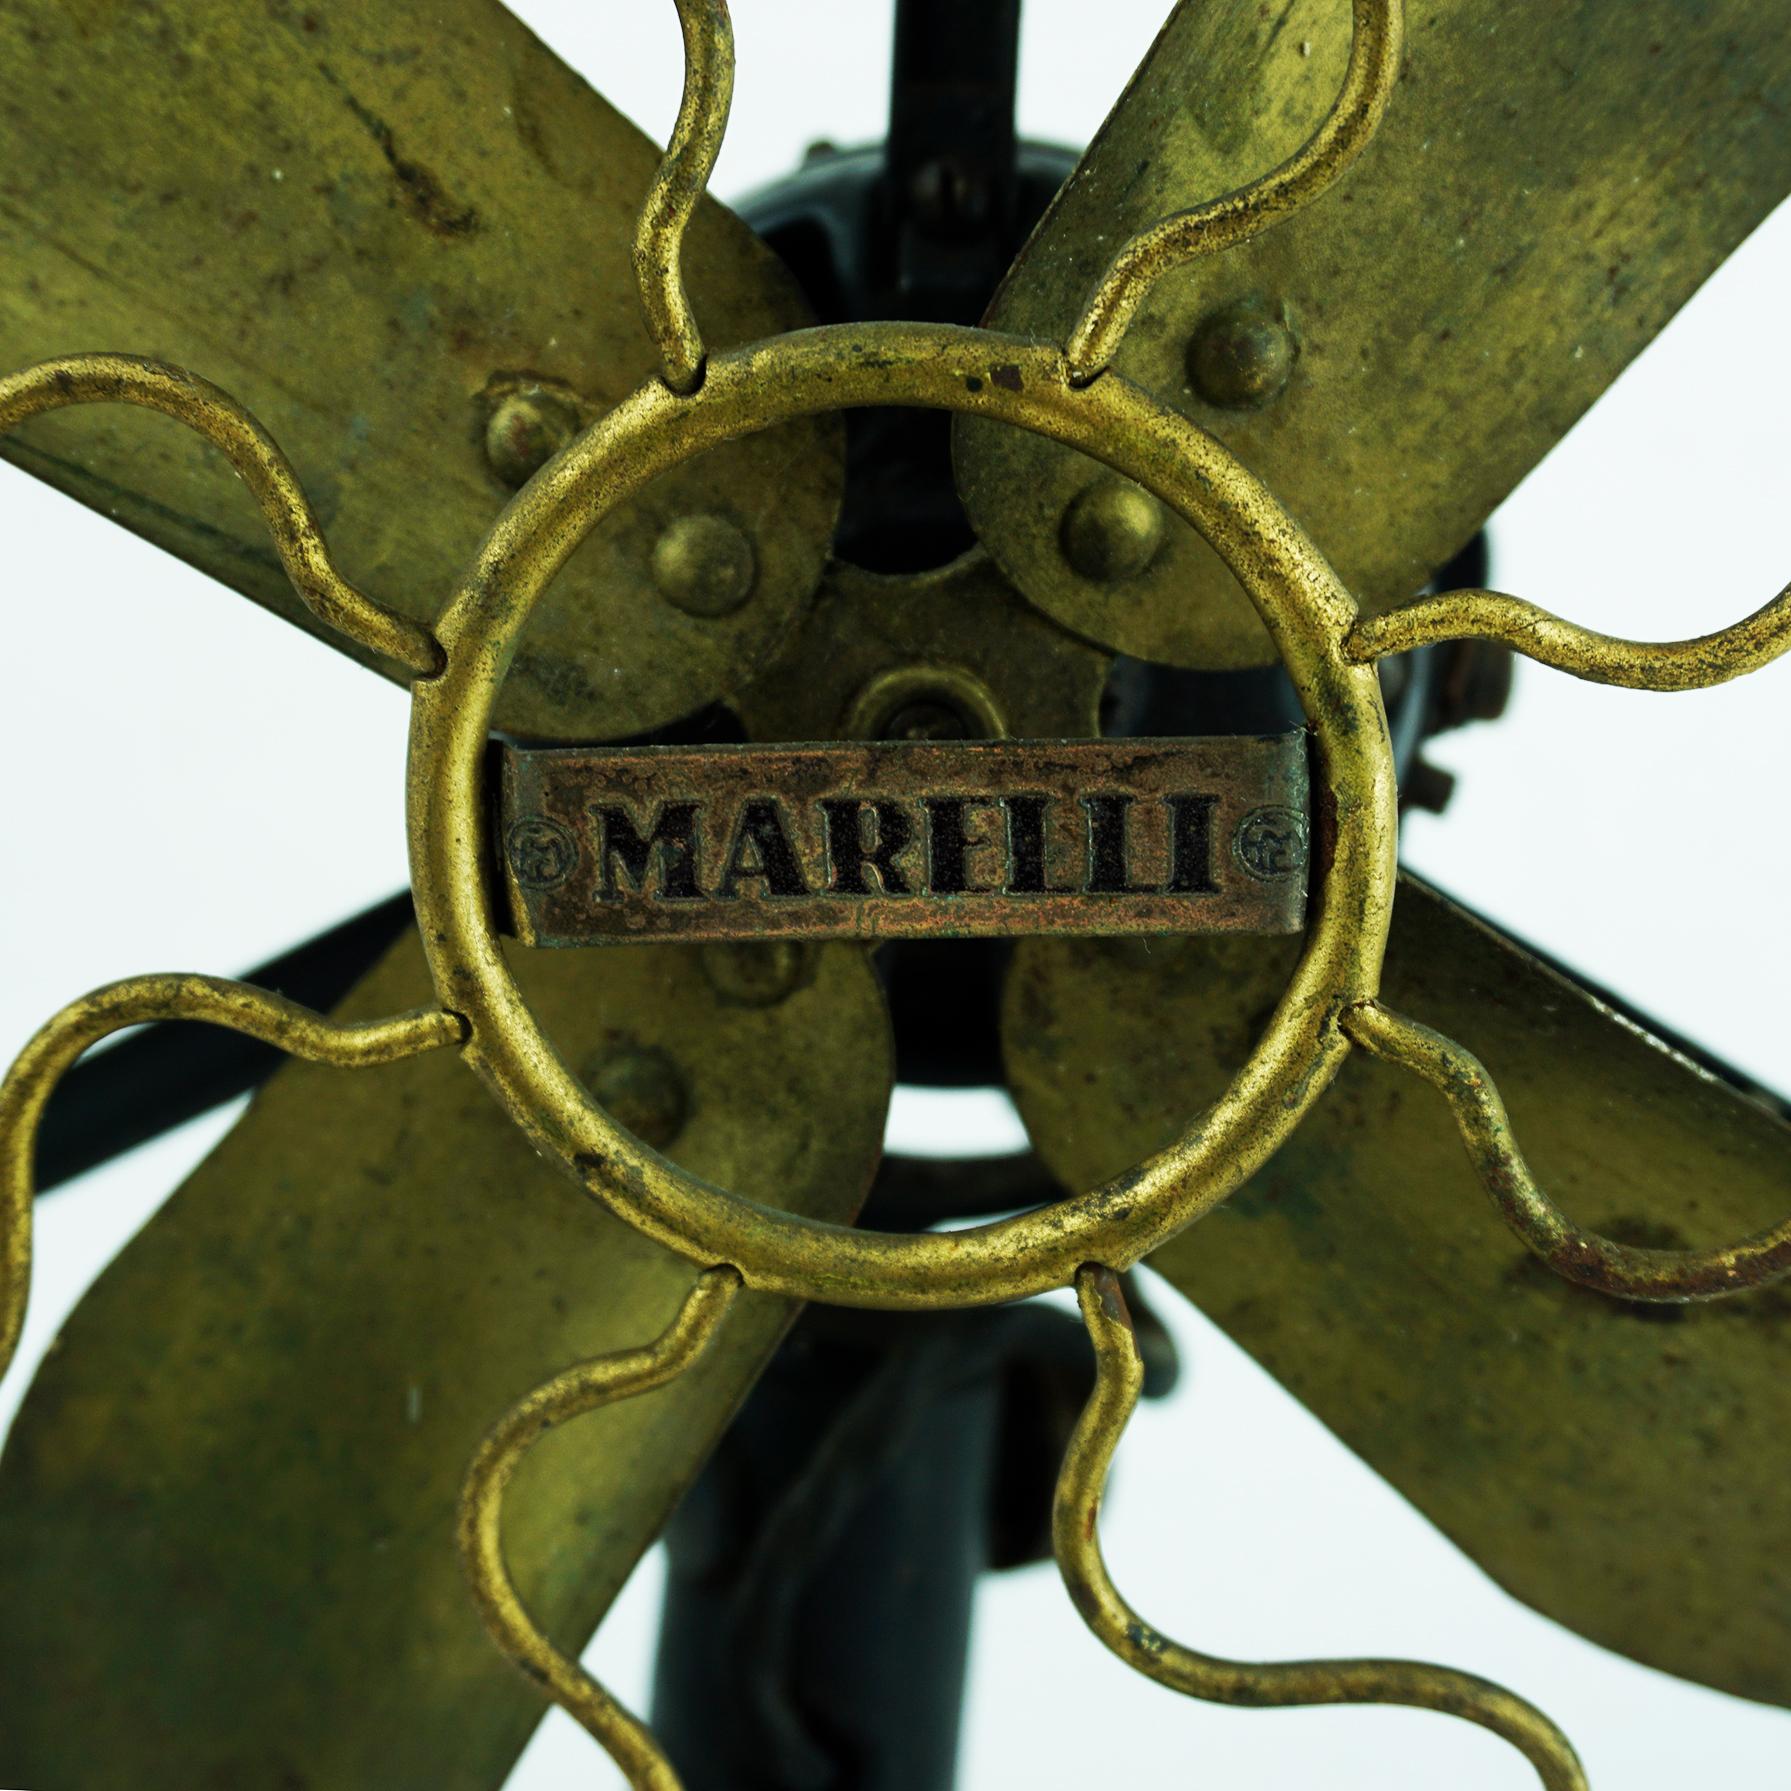 This iconoc Italian table fan has been produced by Marelli ca 1940s.
It is in original condition, with some wear and some losses at the base consistent of age and use, preserving a beautiful patina. Please have a look at the photos! It still is